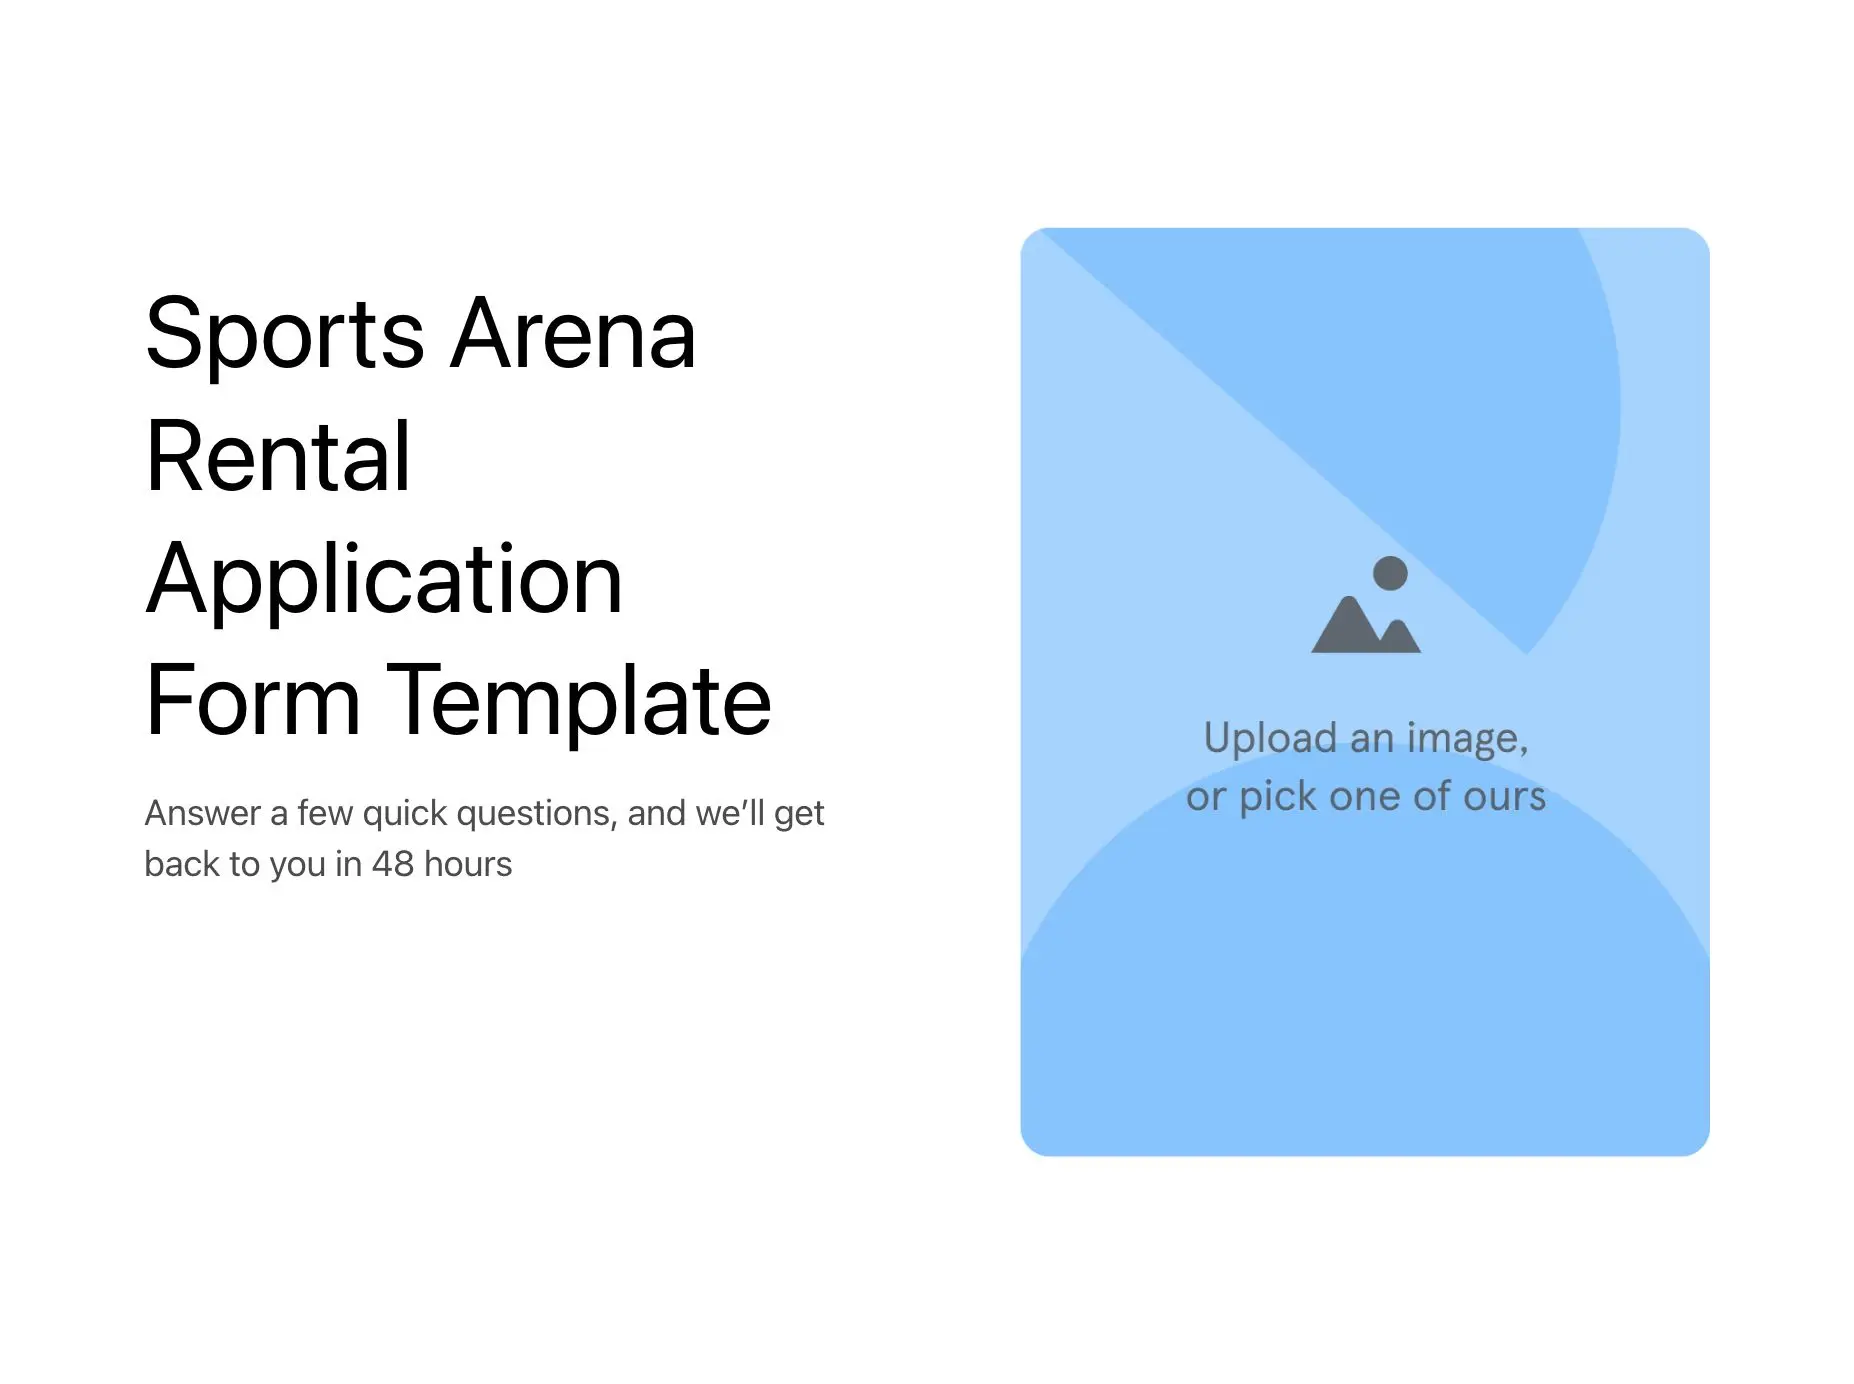 Sports Arena Rental Application Form Template Hero